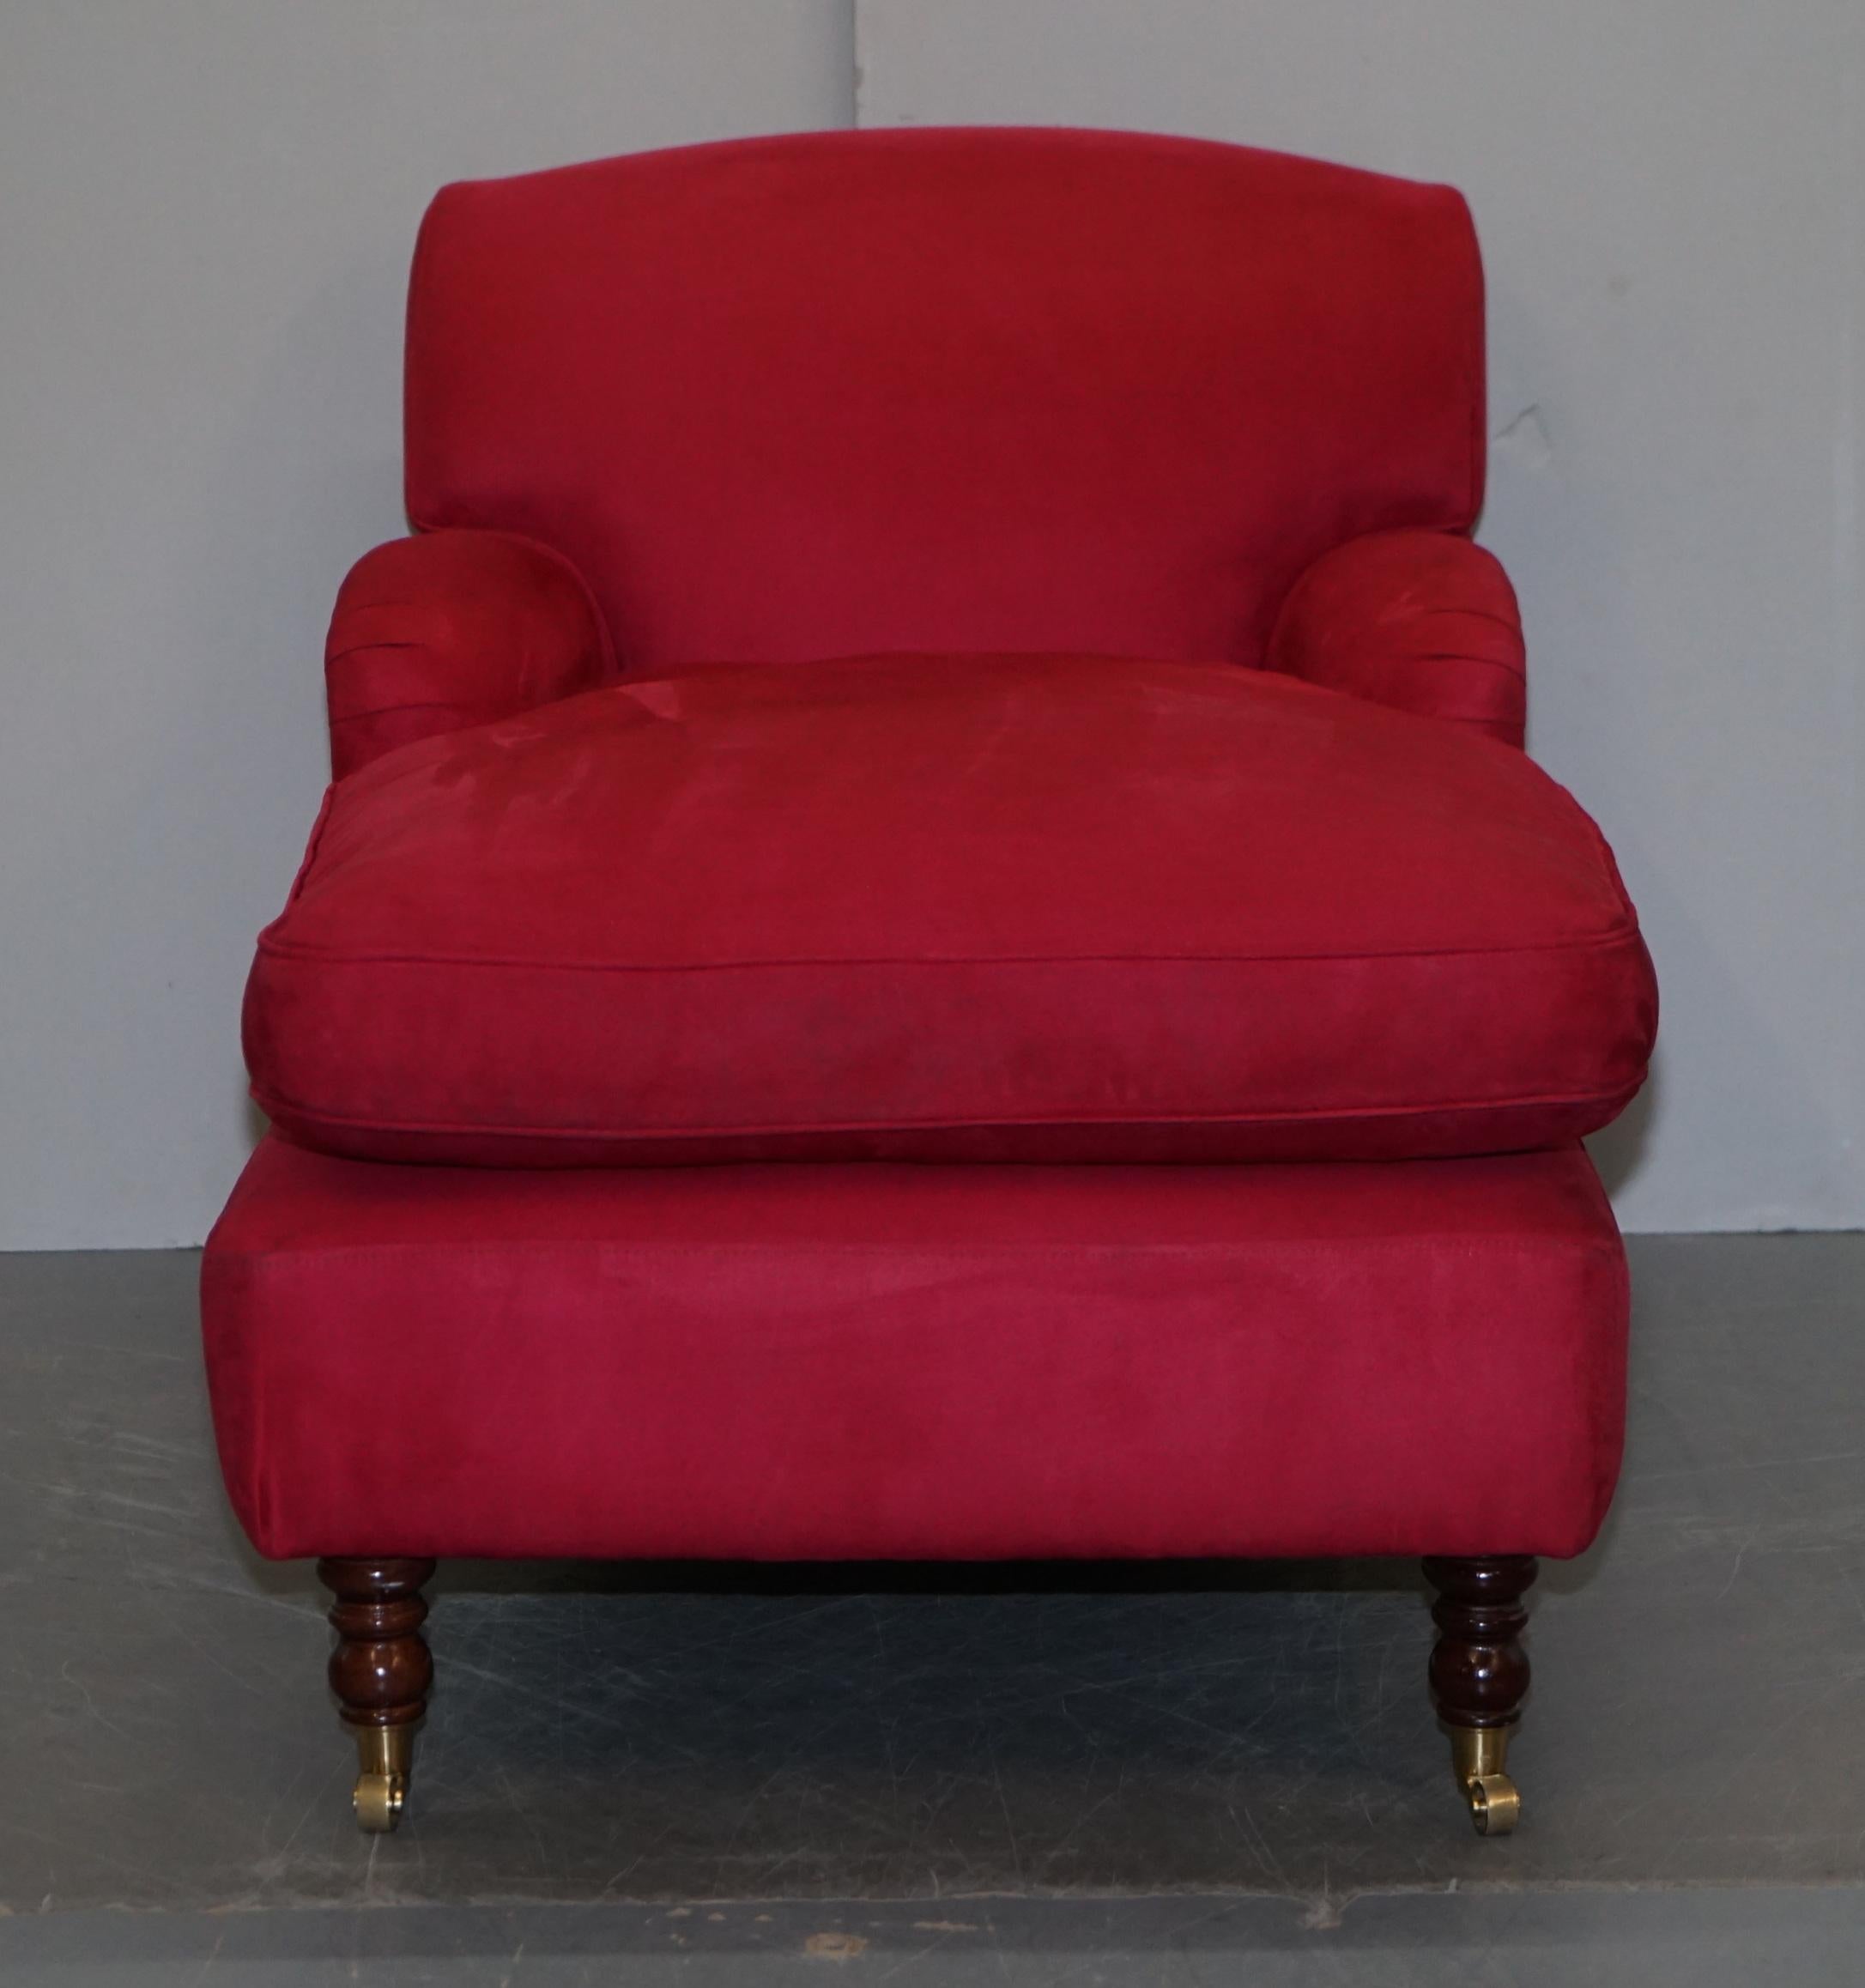 We are delighted to offer for sale this stunning luxurious and exceptionally comfortable red velvet upholstered Signature scroll arm chaise lounge with over stuffed feather filled cushion

A very good looking well made and comfortable chaise, the